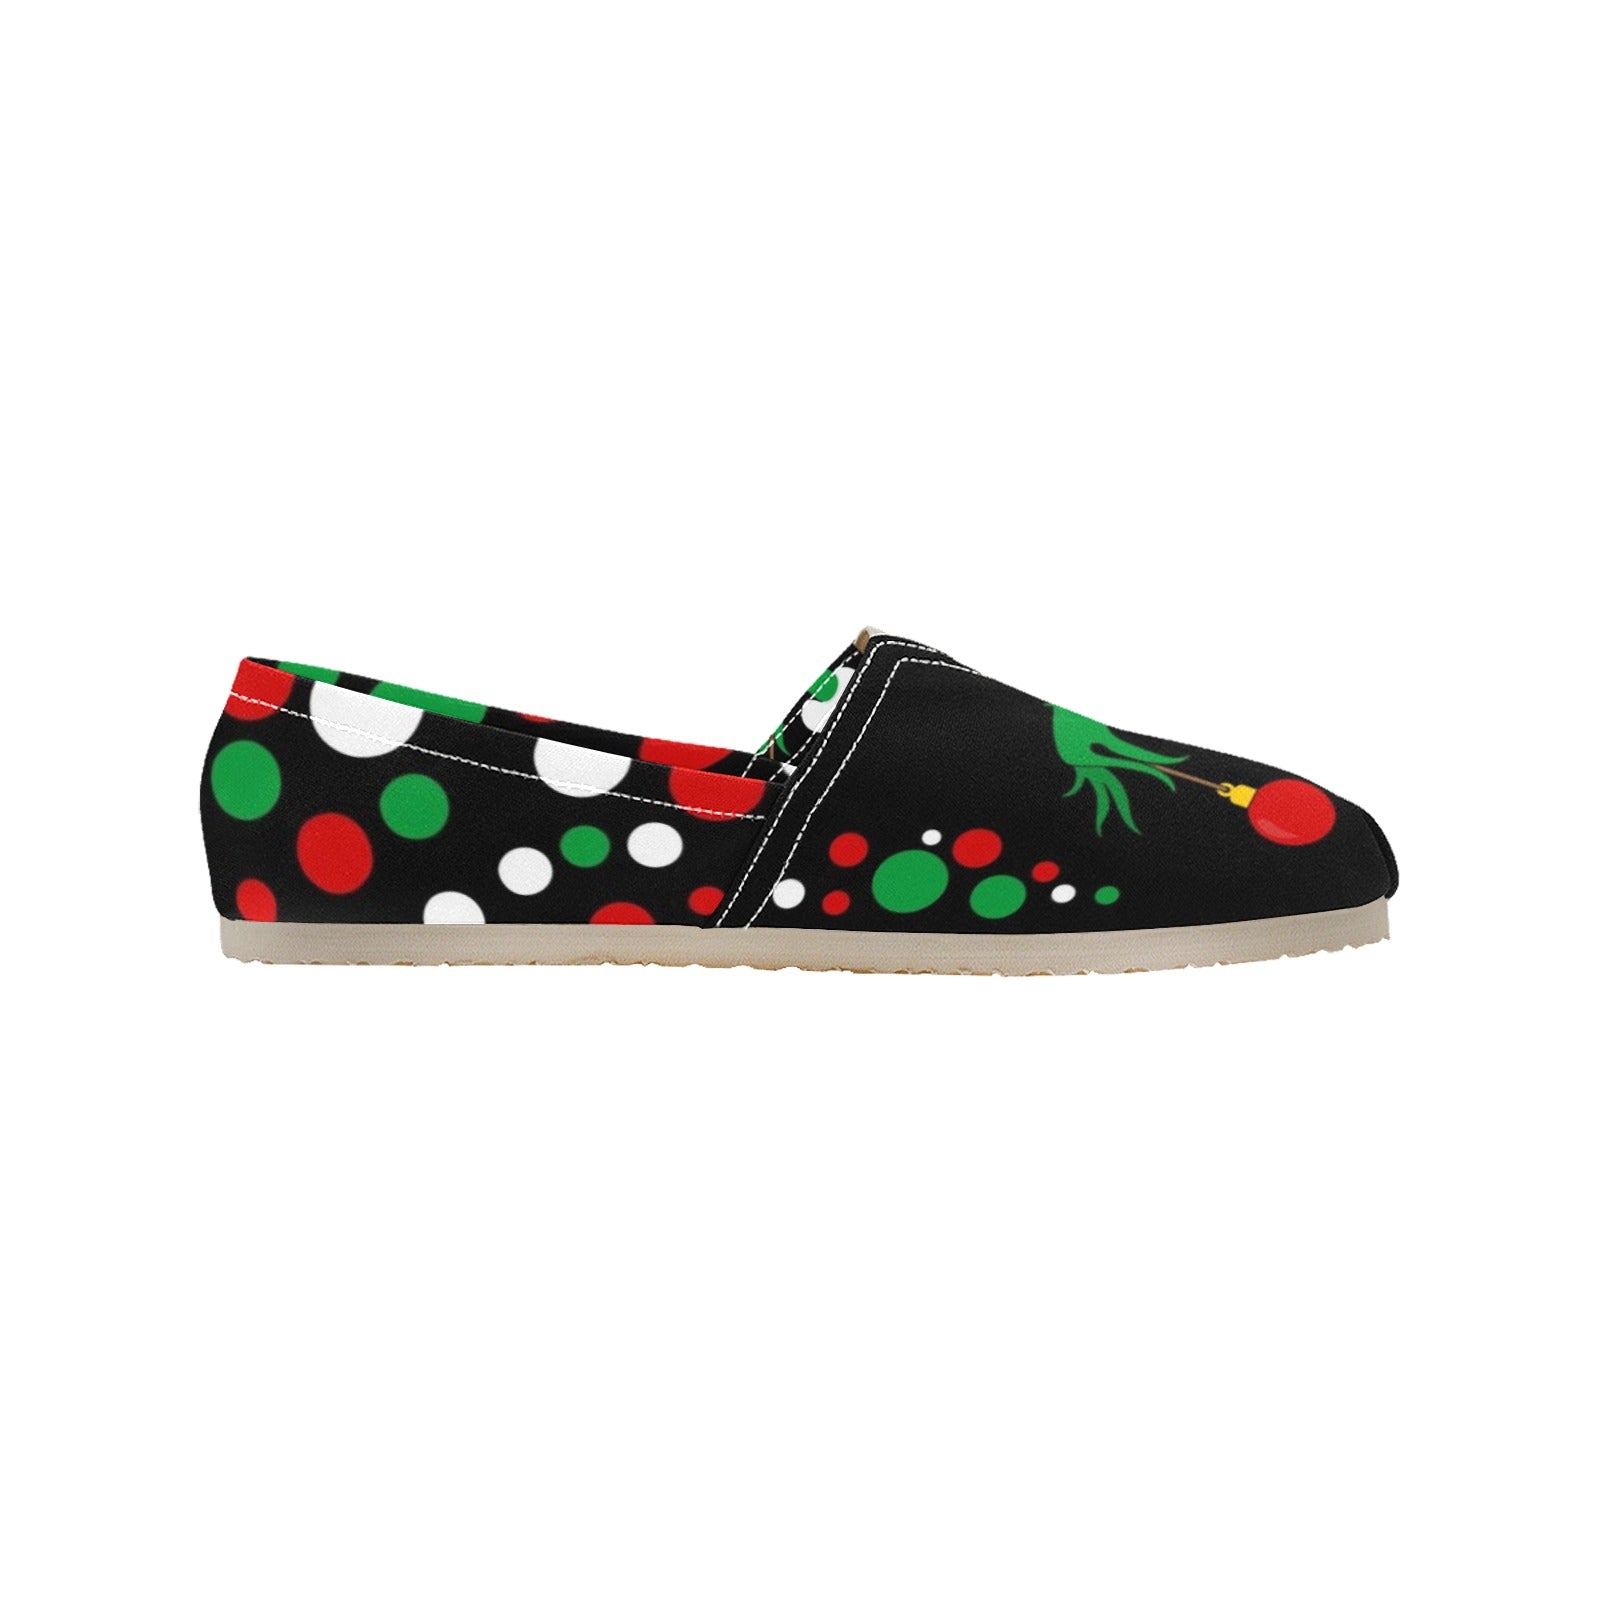 Xmas Blah - Casual Canvas Slip-on Shoes